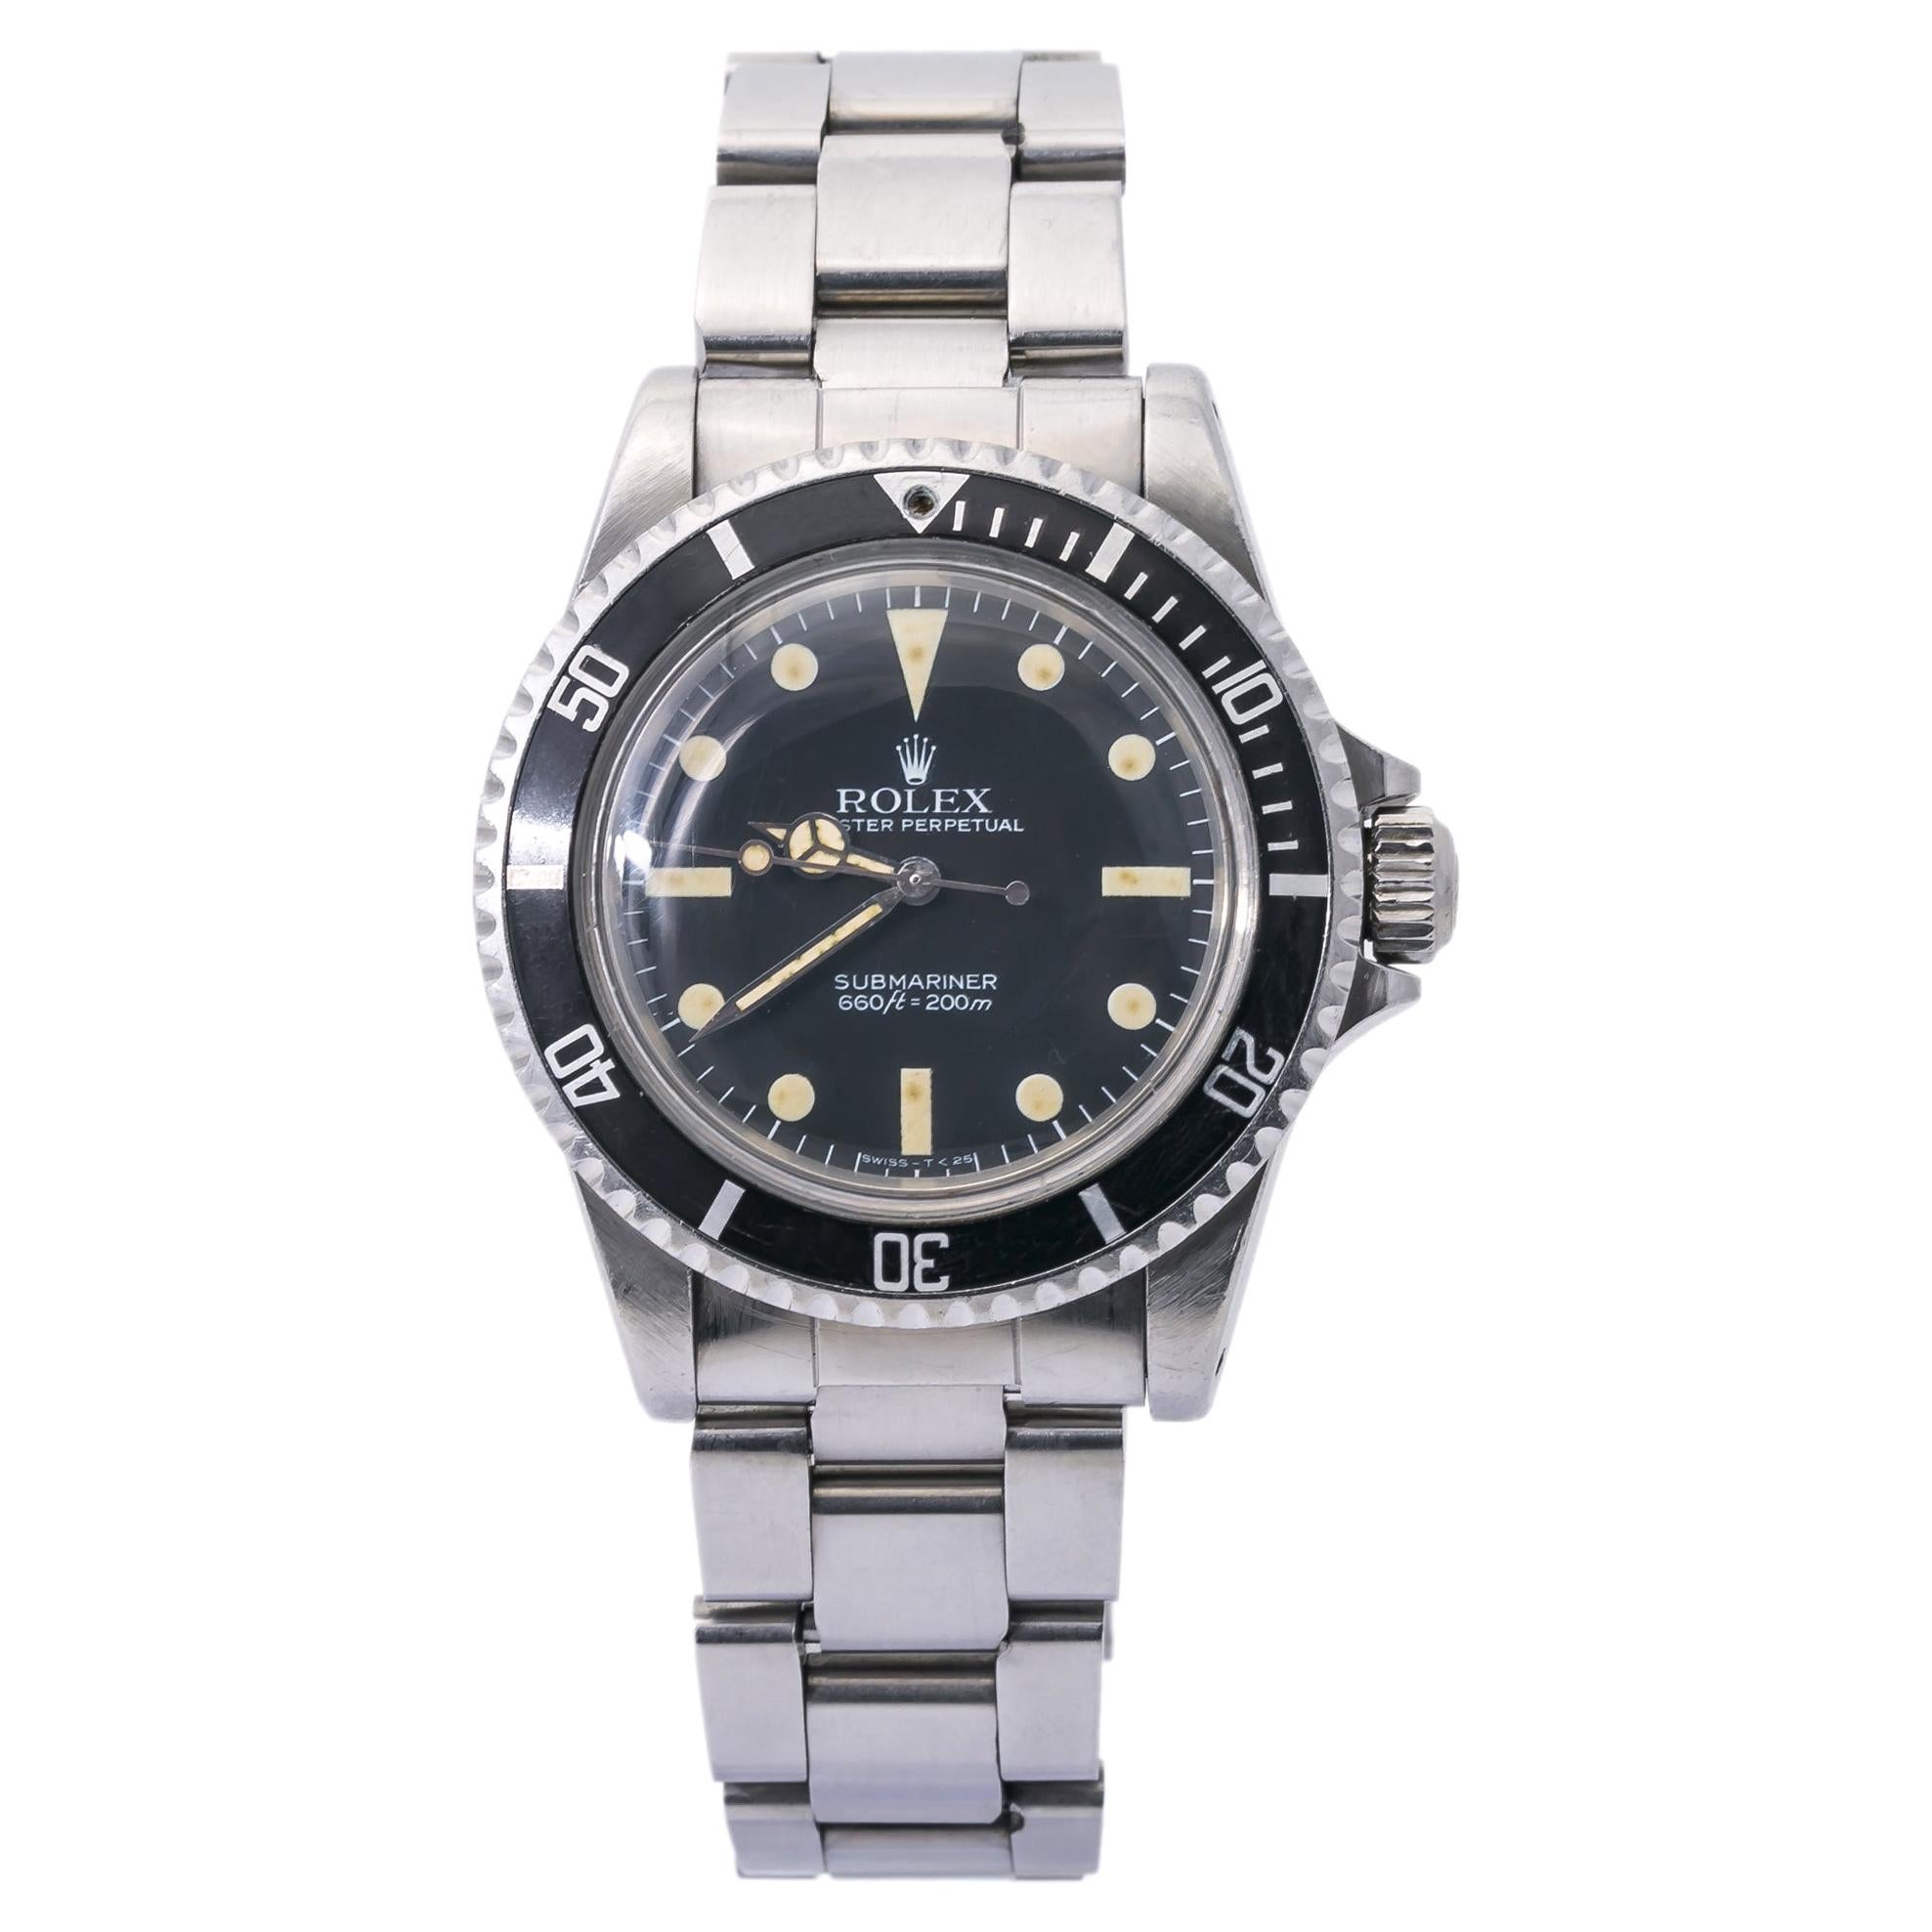 Rolex Submariner 5513 Stainlesss Steel Mens Automatic Bidirectional For Sale